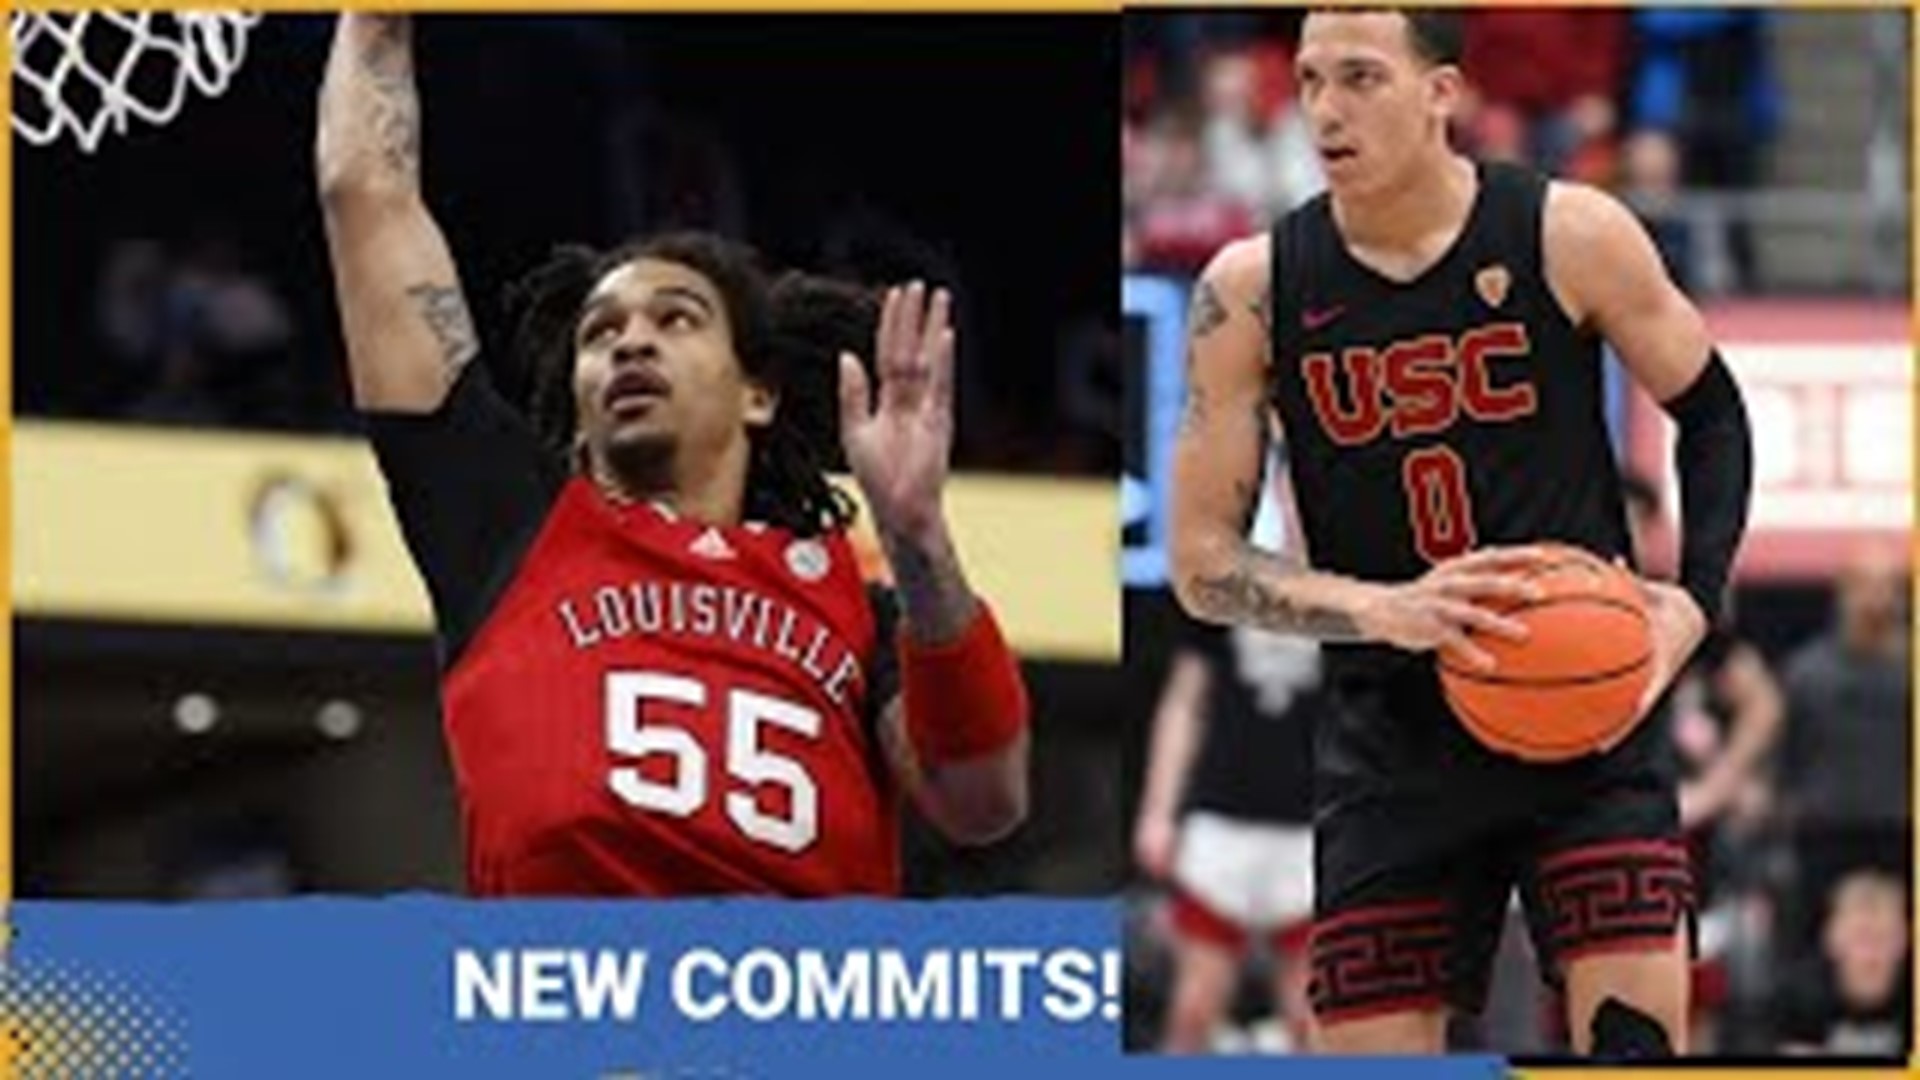 The transfer portal is open for business even as the NCAA Tournament heads into Final Four weekend! Mick Cronin makes his moves as he finds two commits.